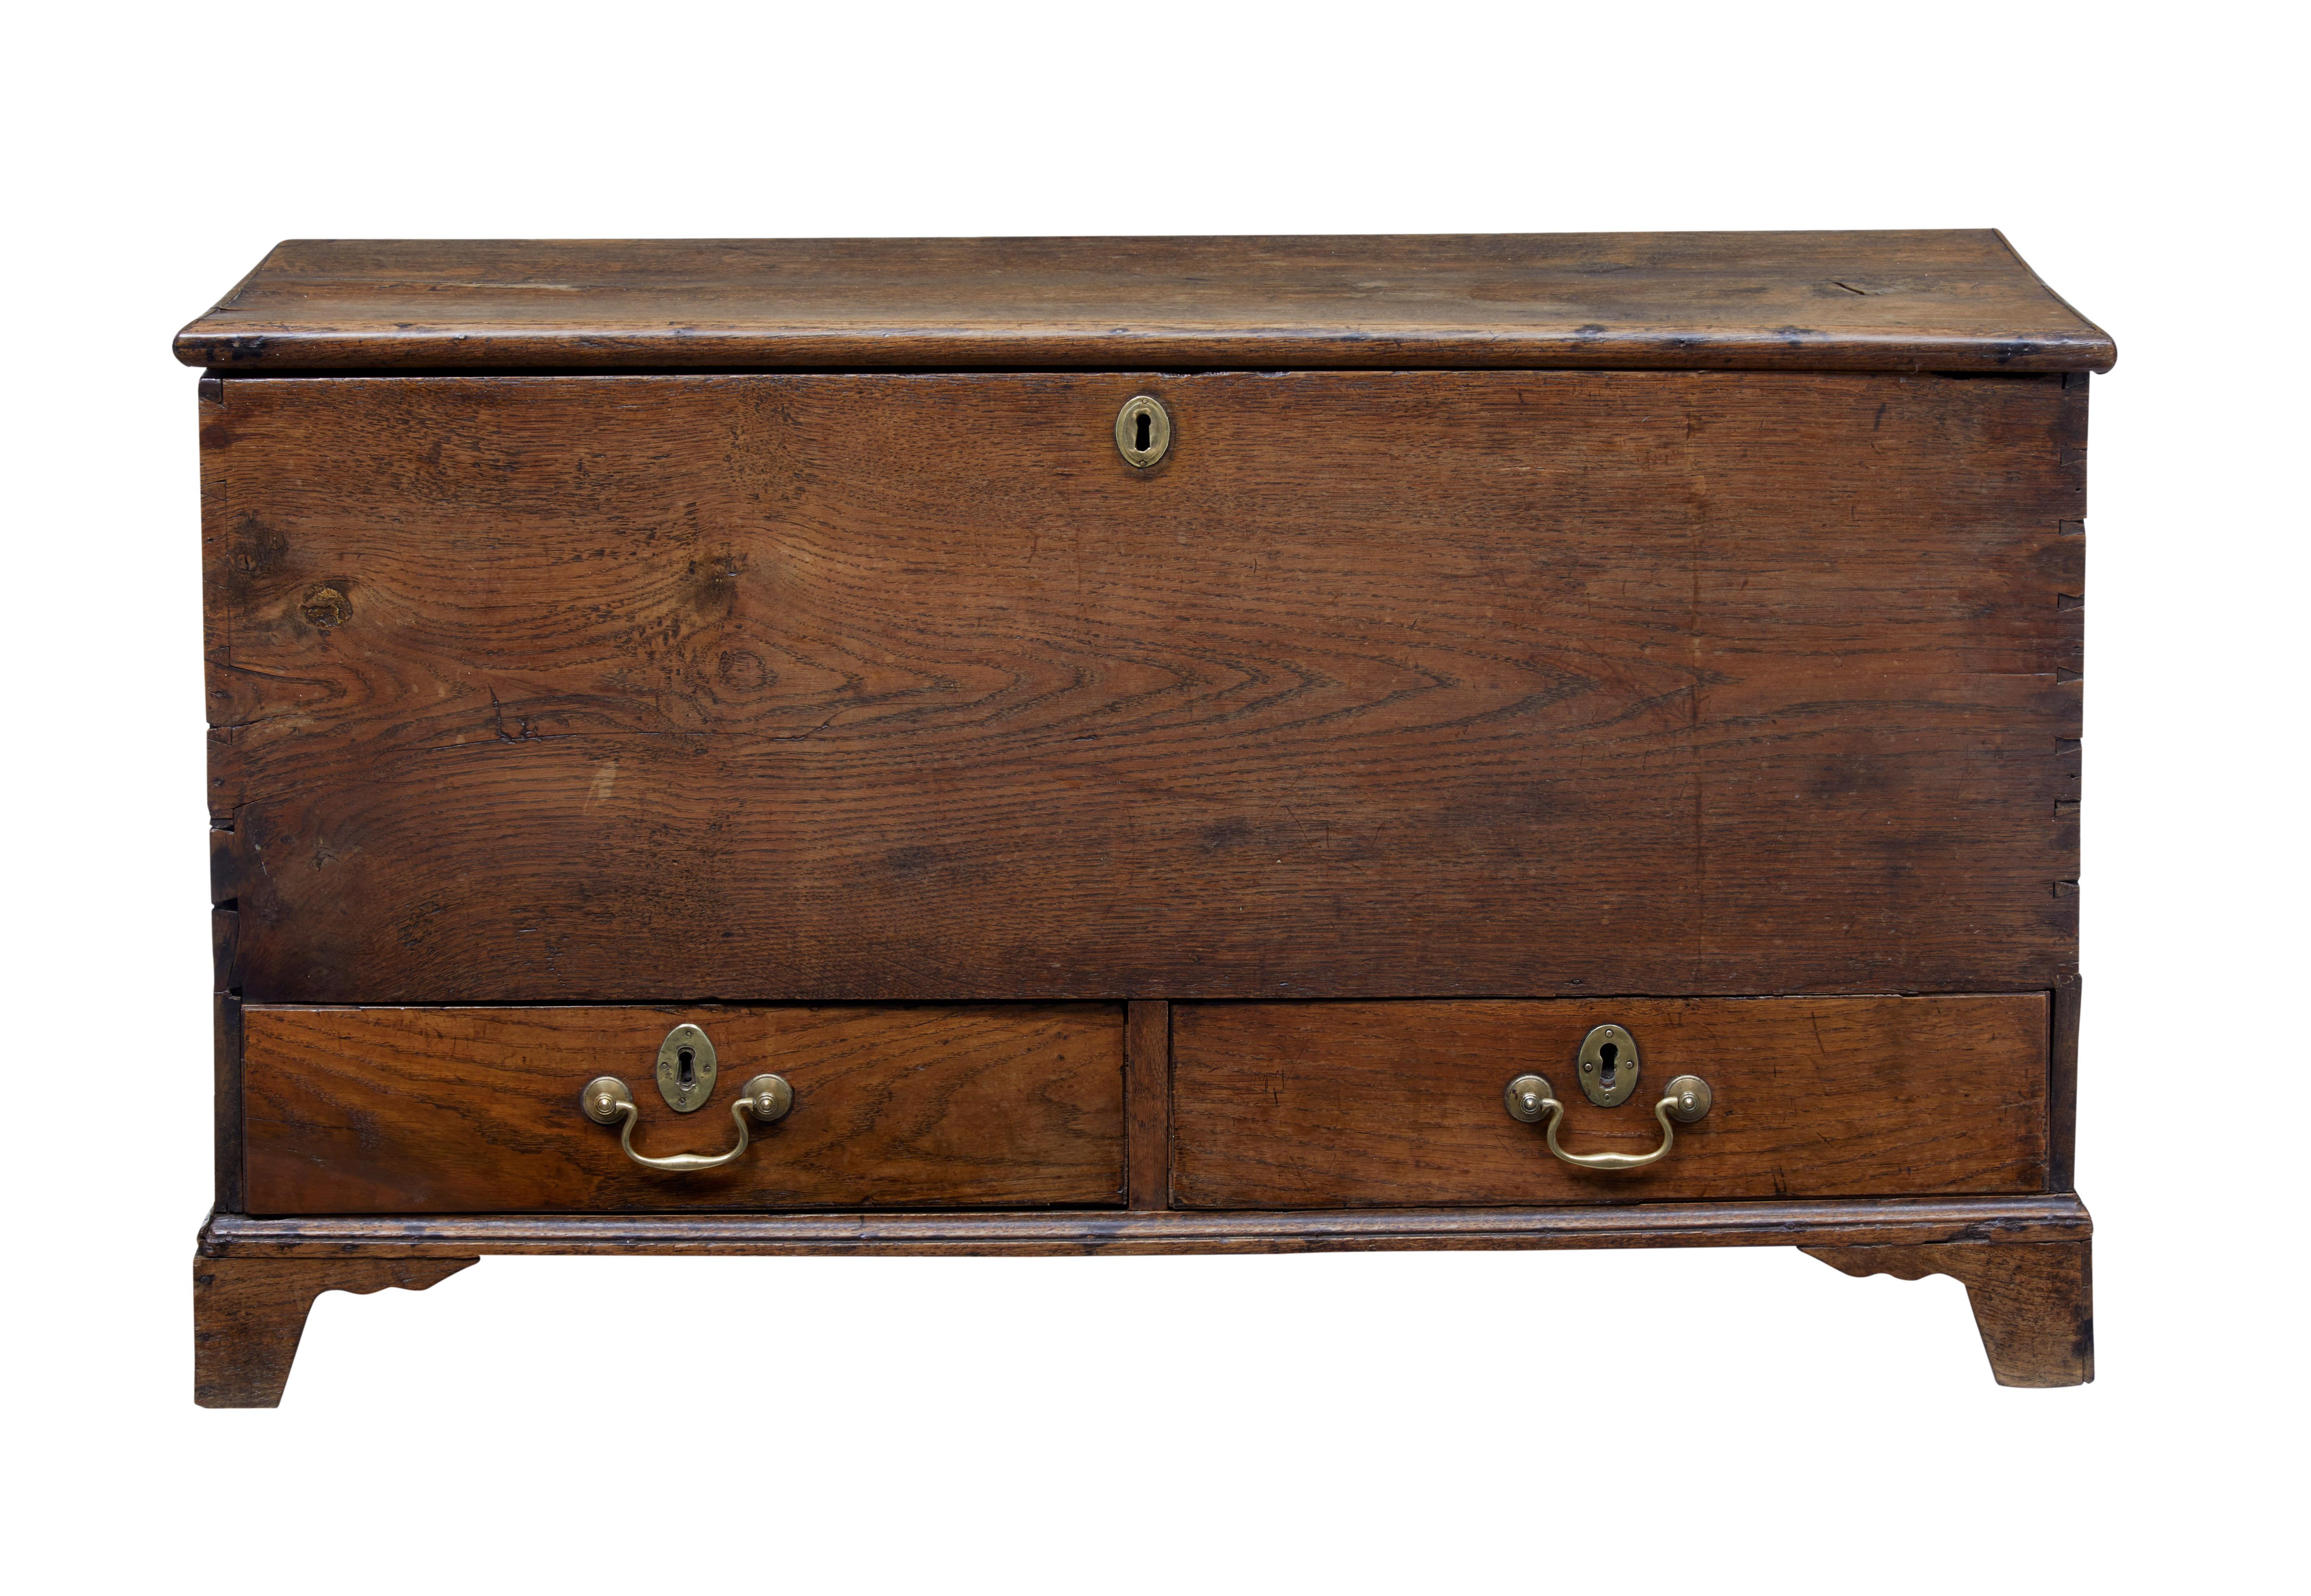 Here we have a late Georgian oak mule chest of small proportions, circa 1790.

Top lid opens for storage space, with a pair of drawers with brass swan neck handles below.

Good color and patina, standing on bracket feet.

Expected minor age